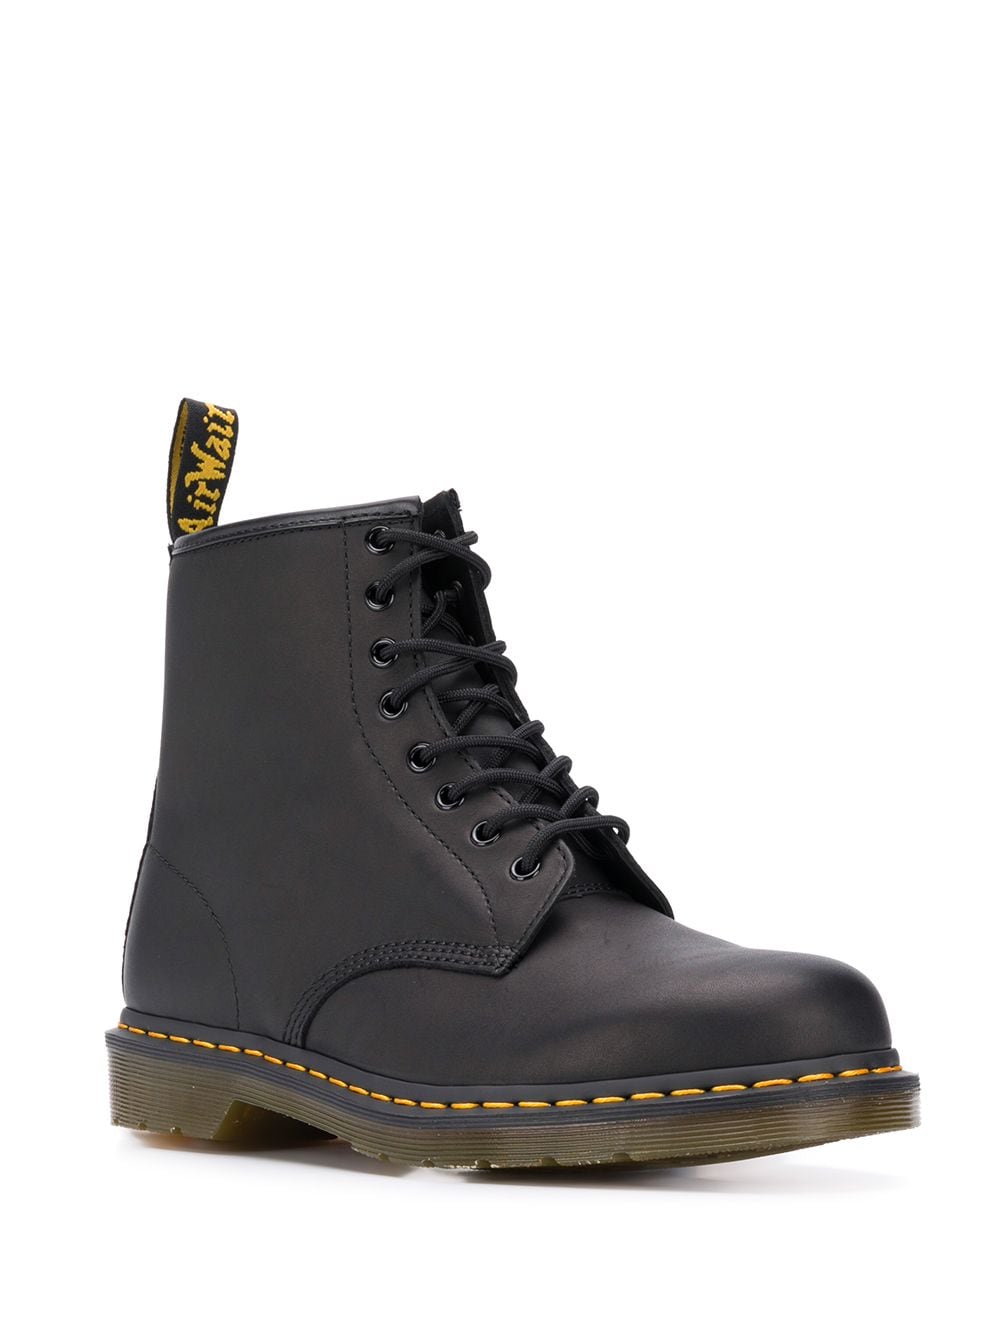 Image 2 of Dr. Martens 1460 boots